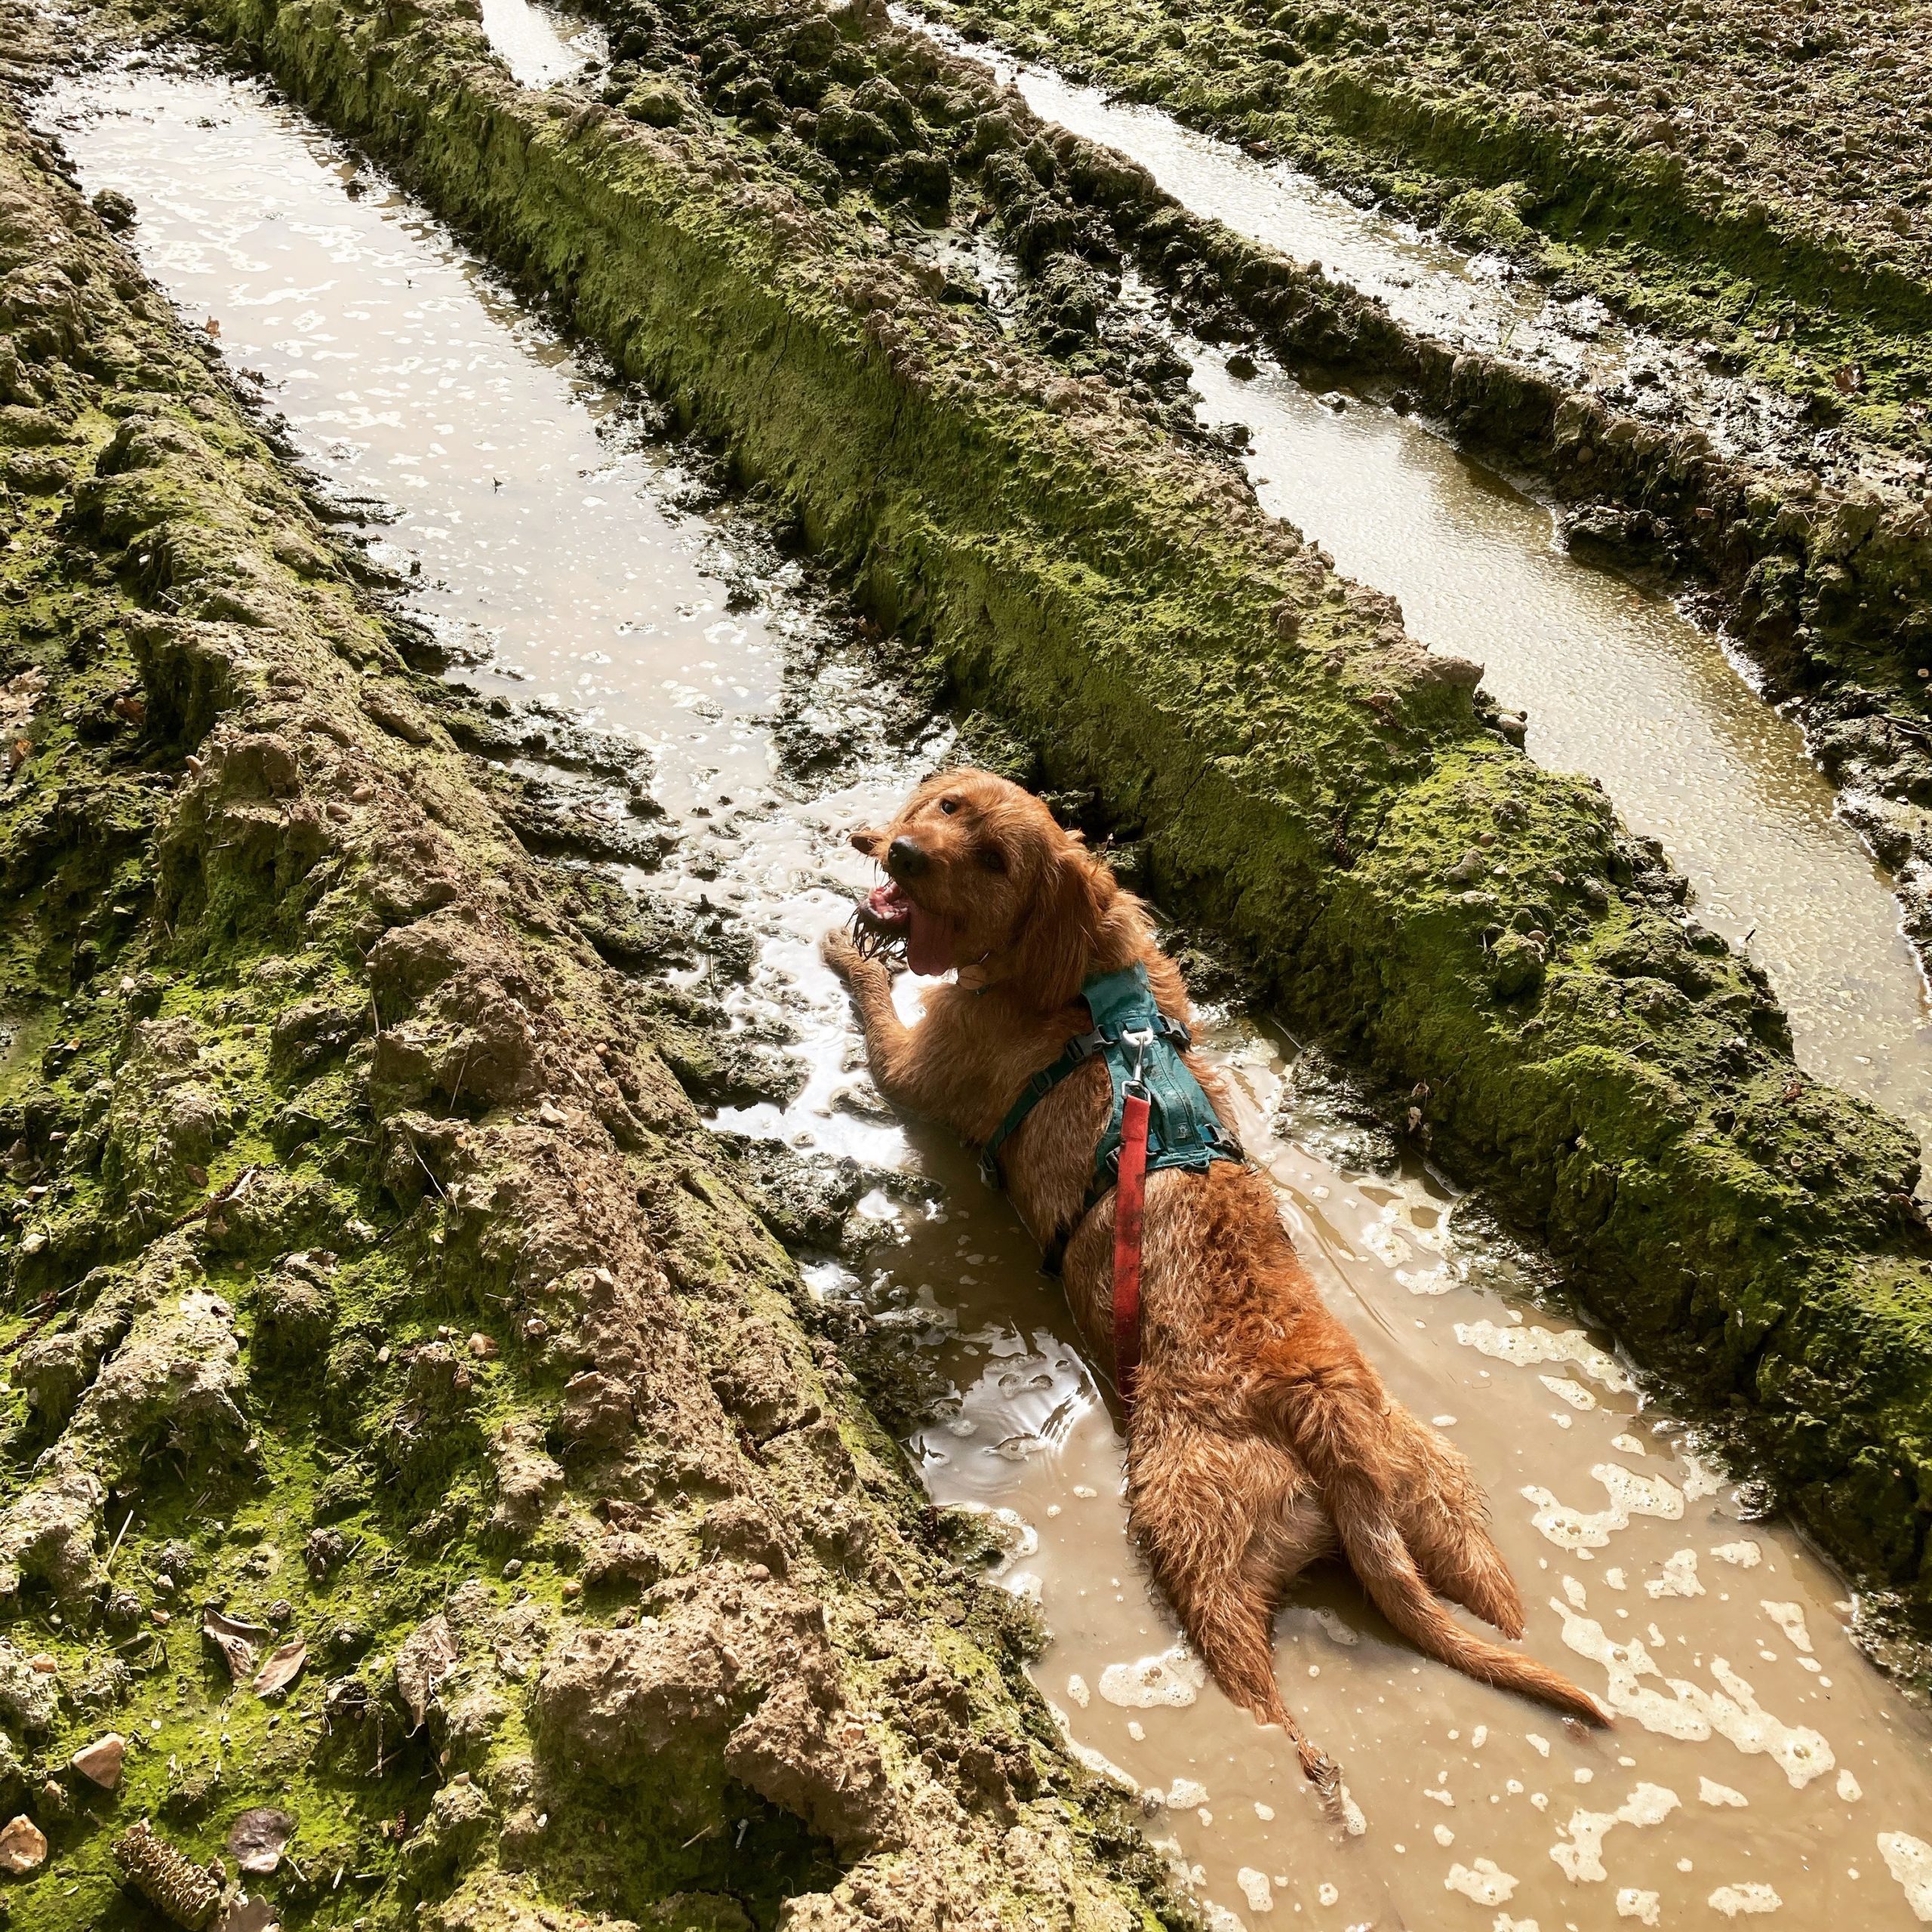 Ghillie, a golden retriever, lying in a ditch of mud quite happily.